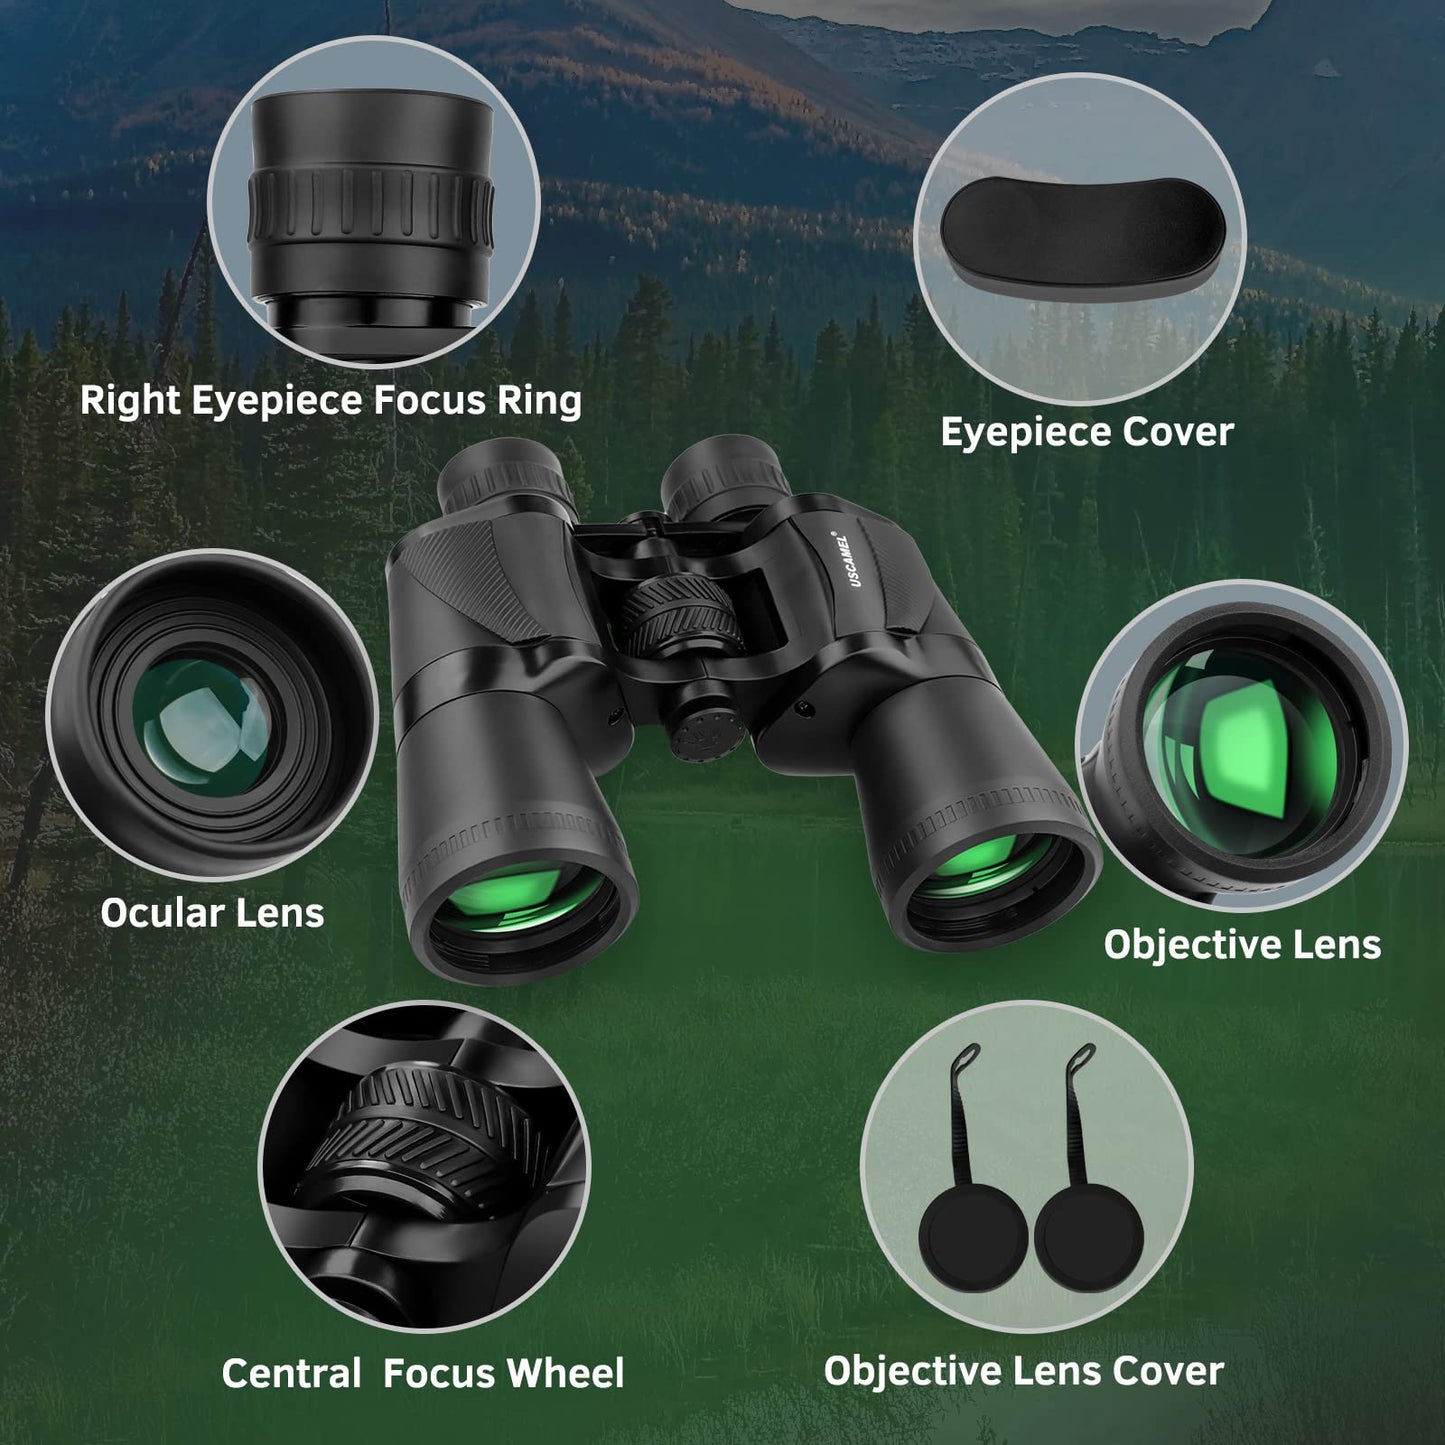 20x50 Binoculars for Adults - Binoculars for Bird Watching Hunting Wildlife Observation Sport Events Whale Watching Hiking and Camping with Harness and Phone Holder